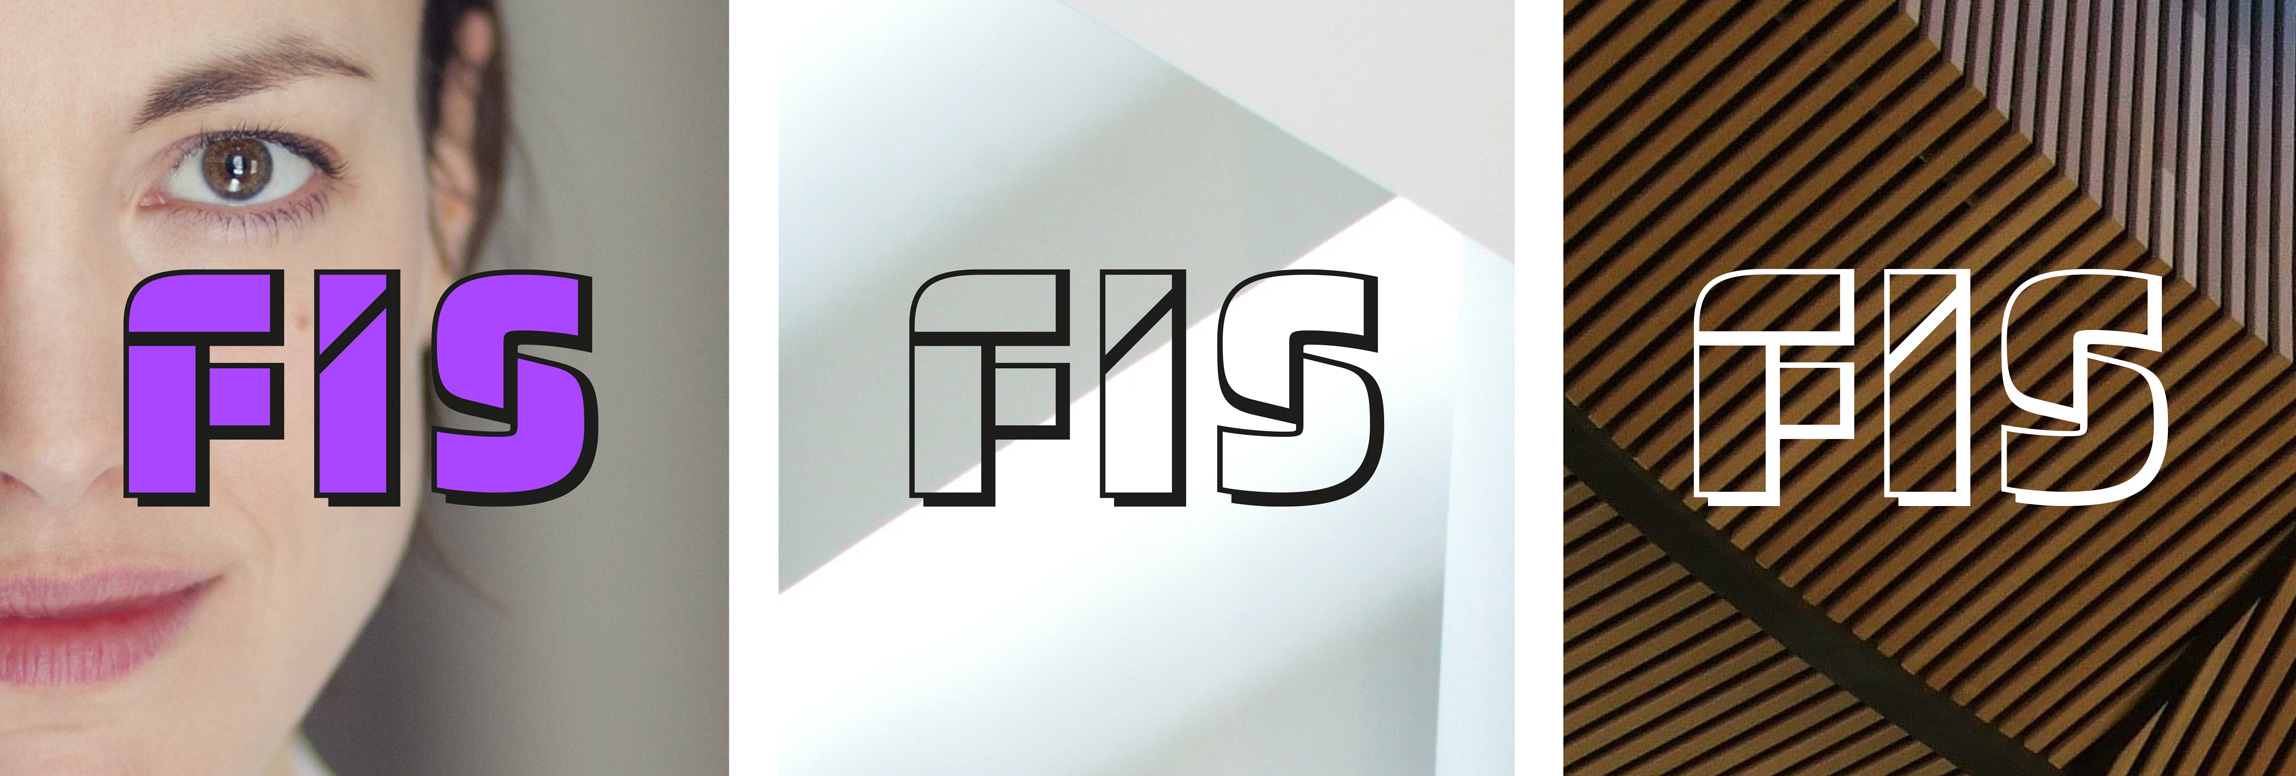 FIS finishes and interiors sector rebrand logo flexibility